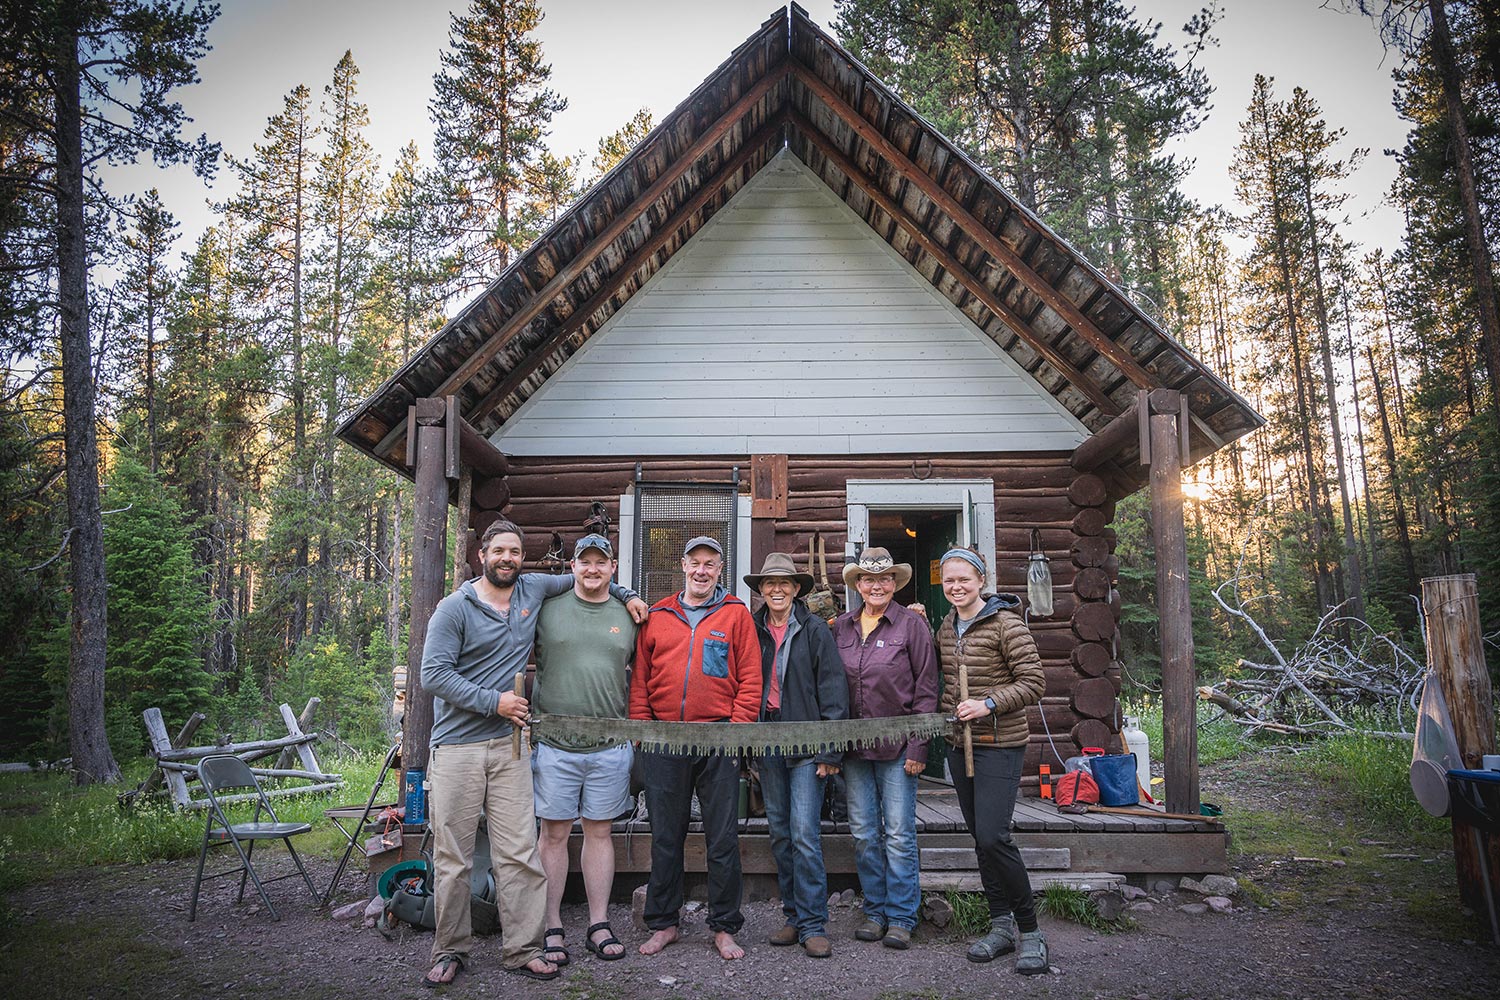 Group with crosscut saw poses outside cabin